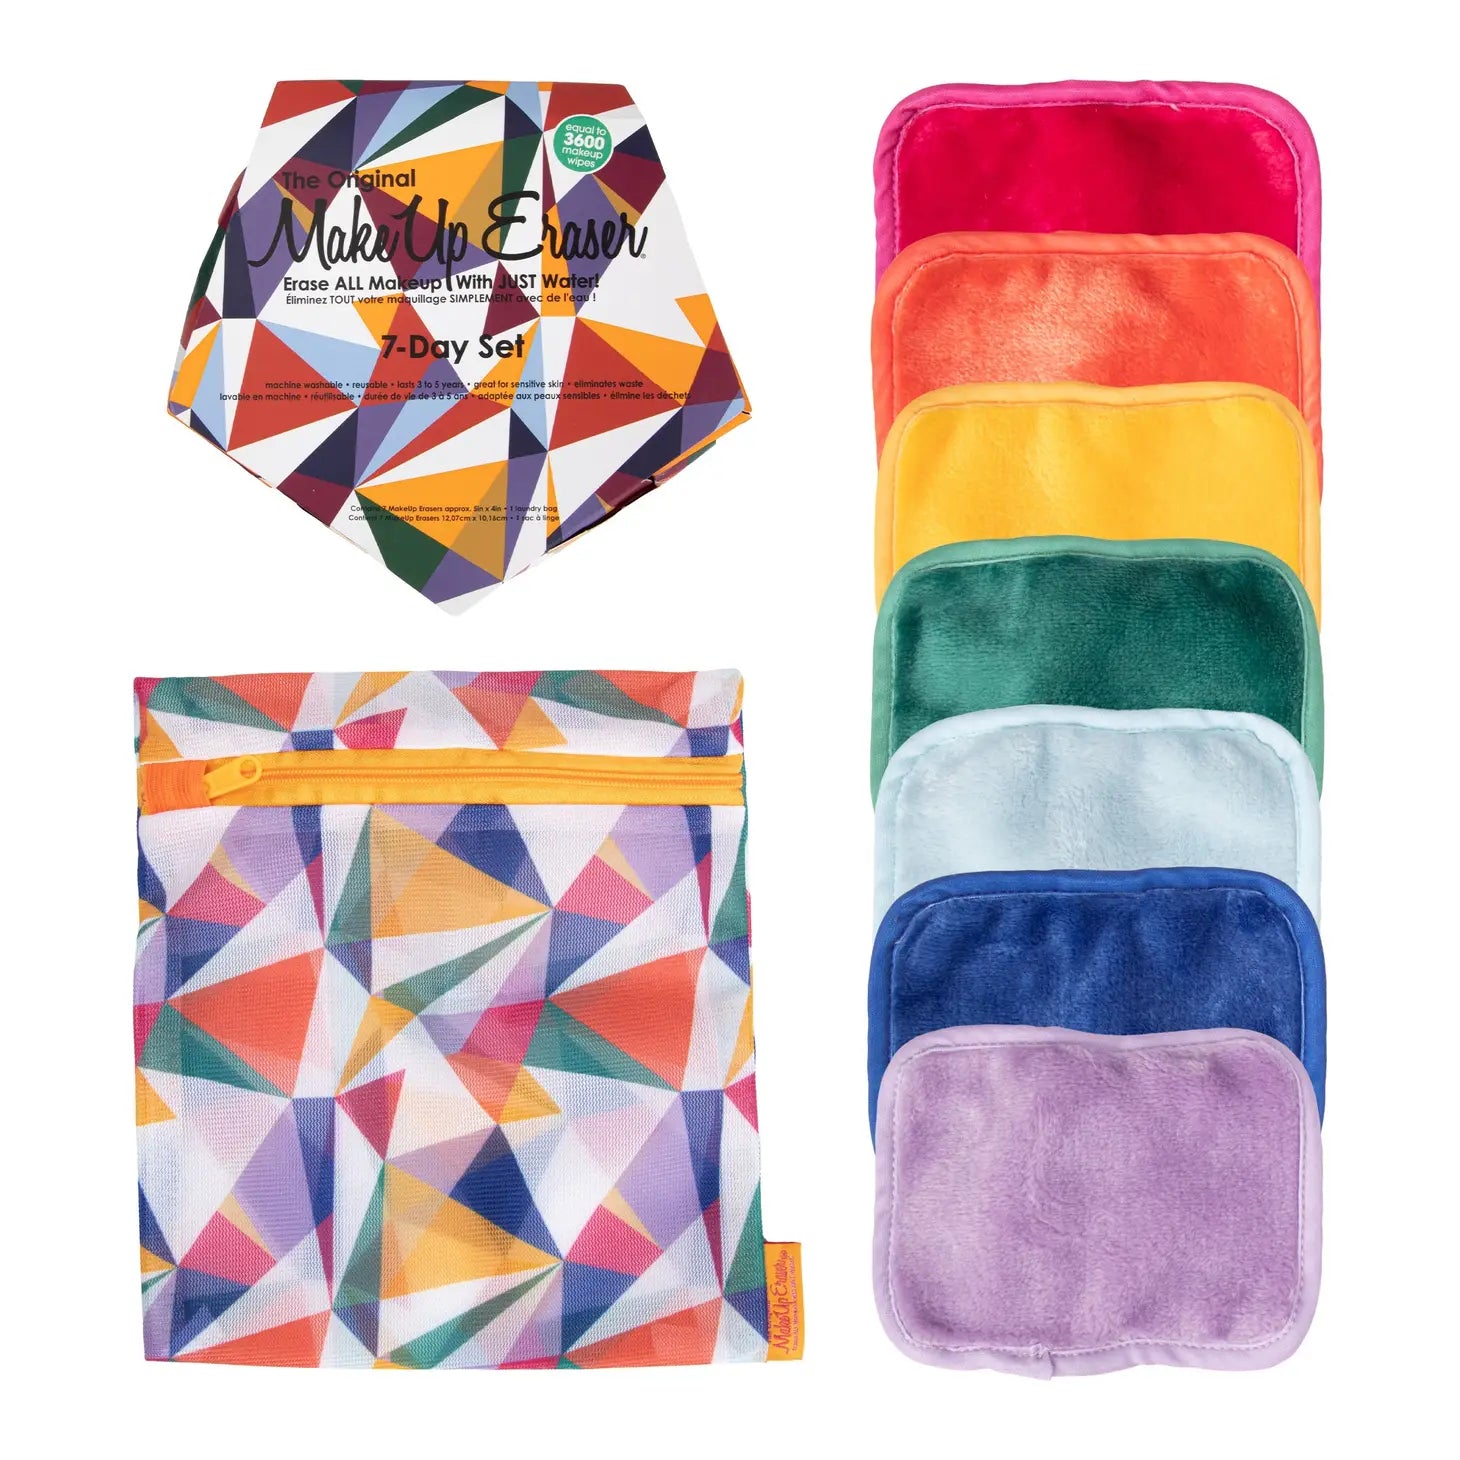 Geometric- makeup erasers with laundry bag- rts